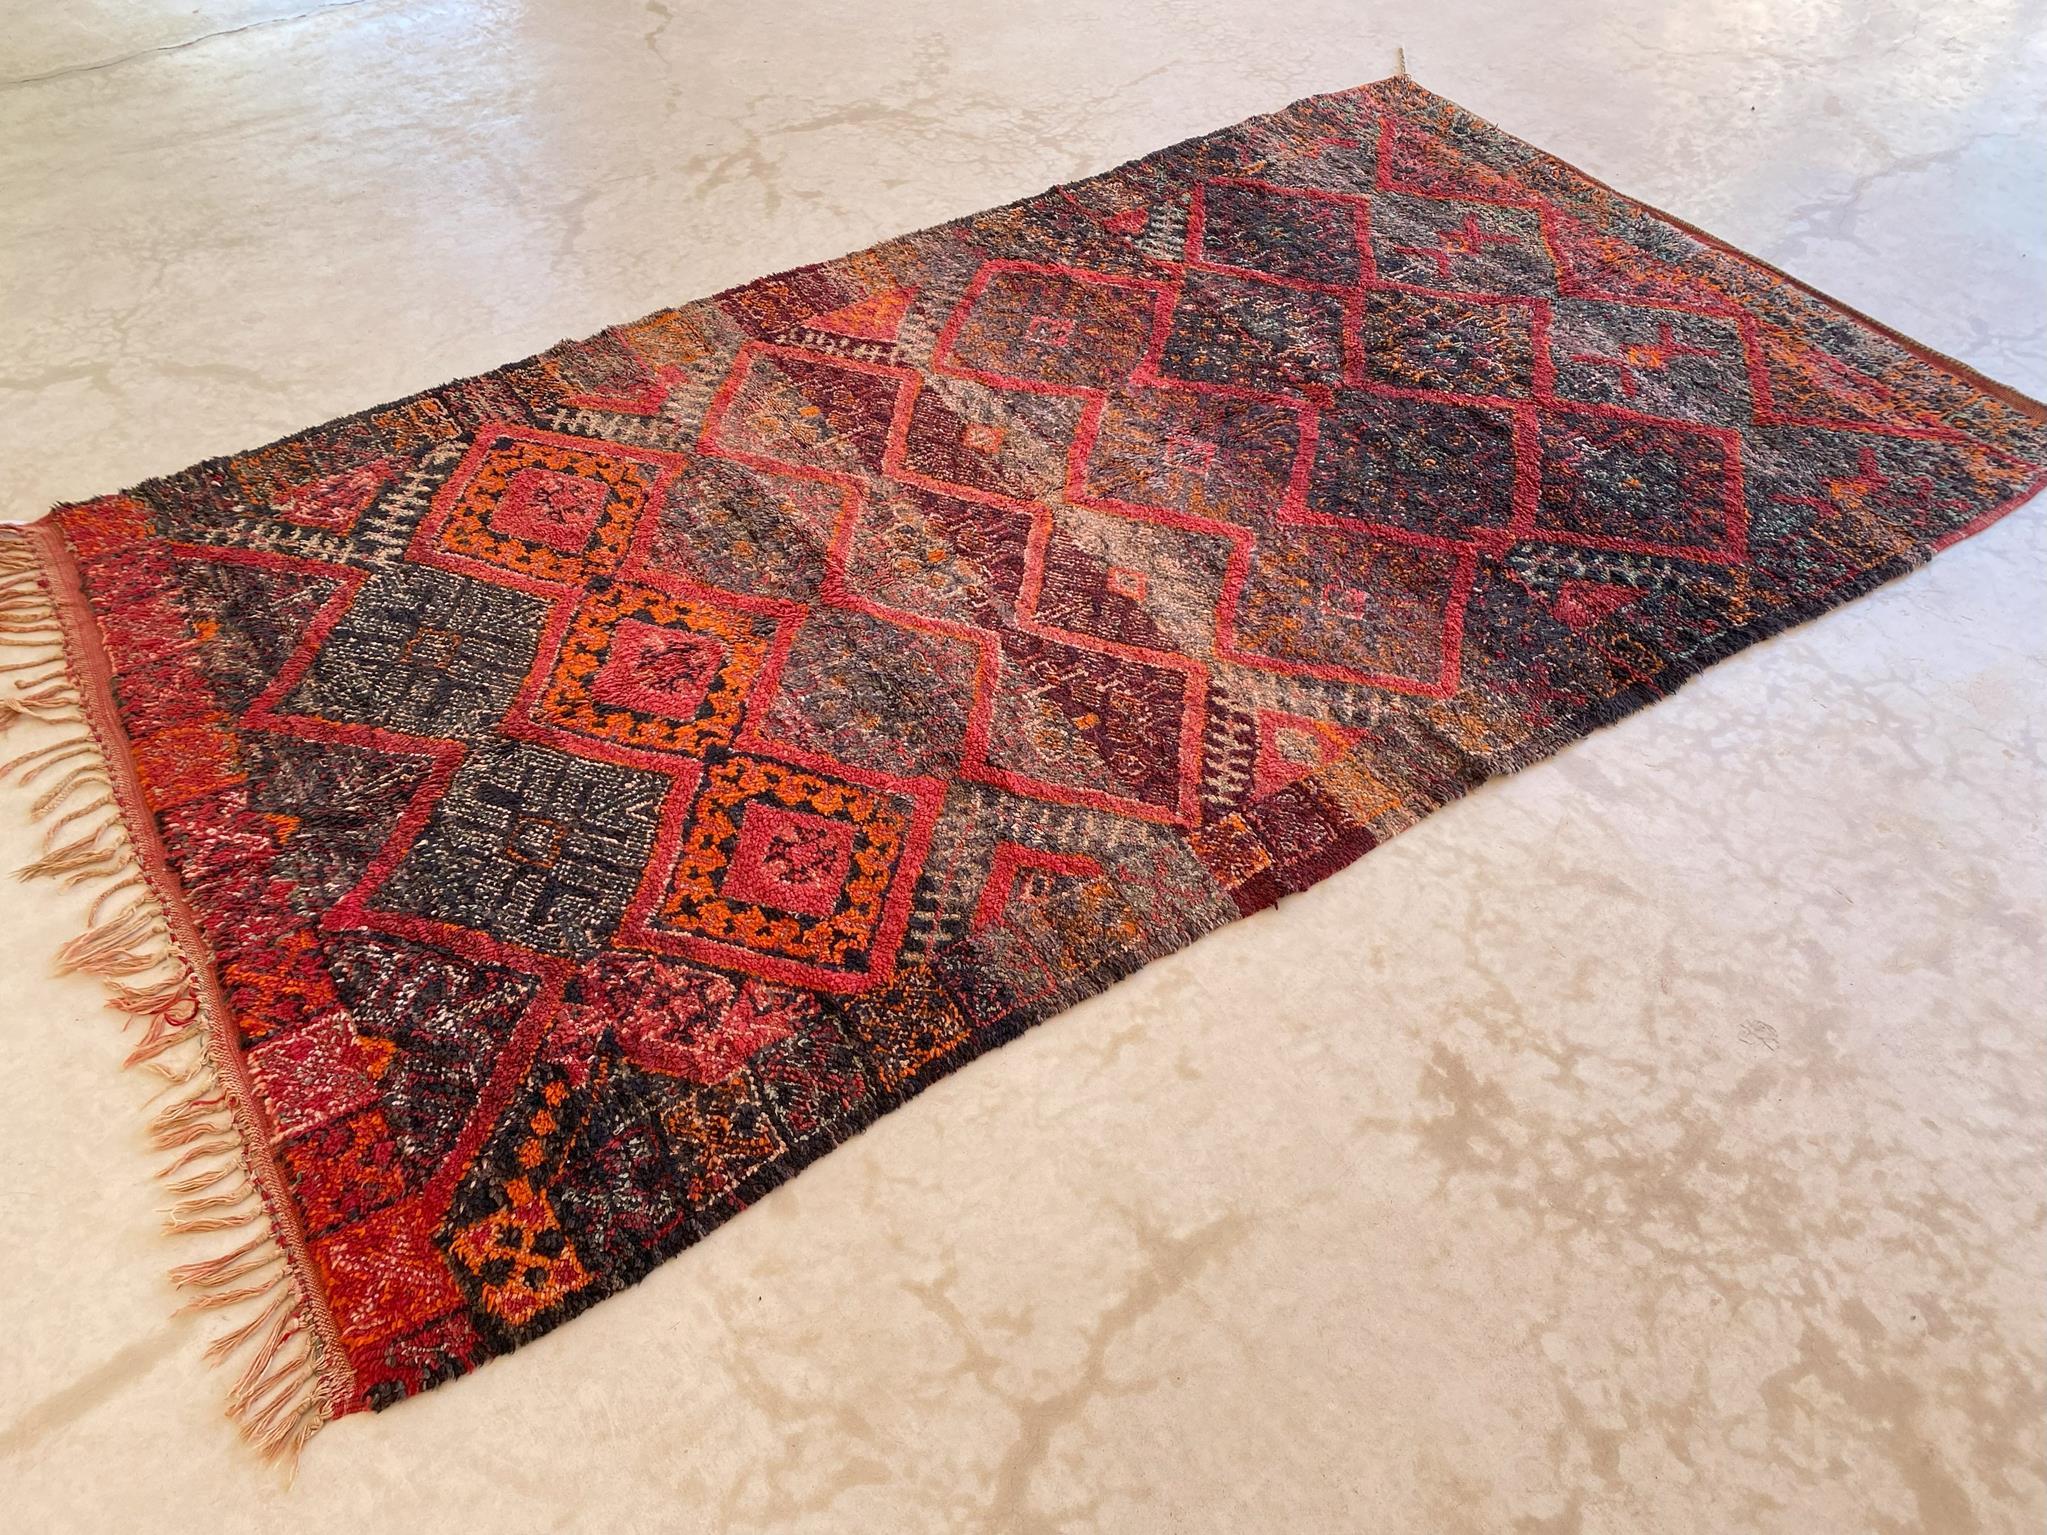 Vintage Moroccan Beni Mguild rug - Black/red - 6x10.8feet / 183x331cm In Good Condition For Sale In Marrakech, MA